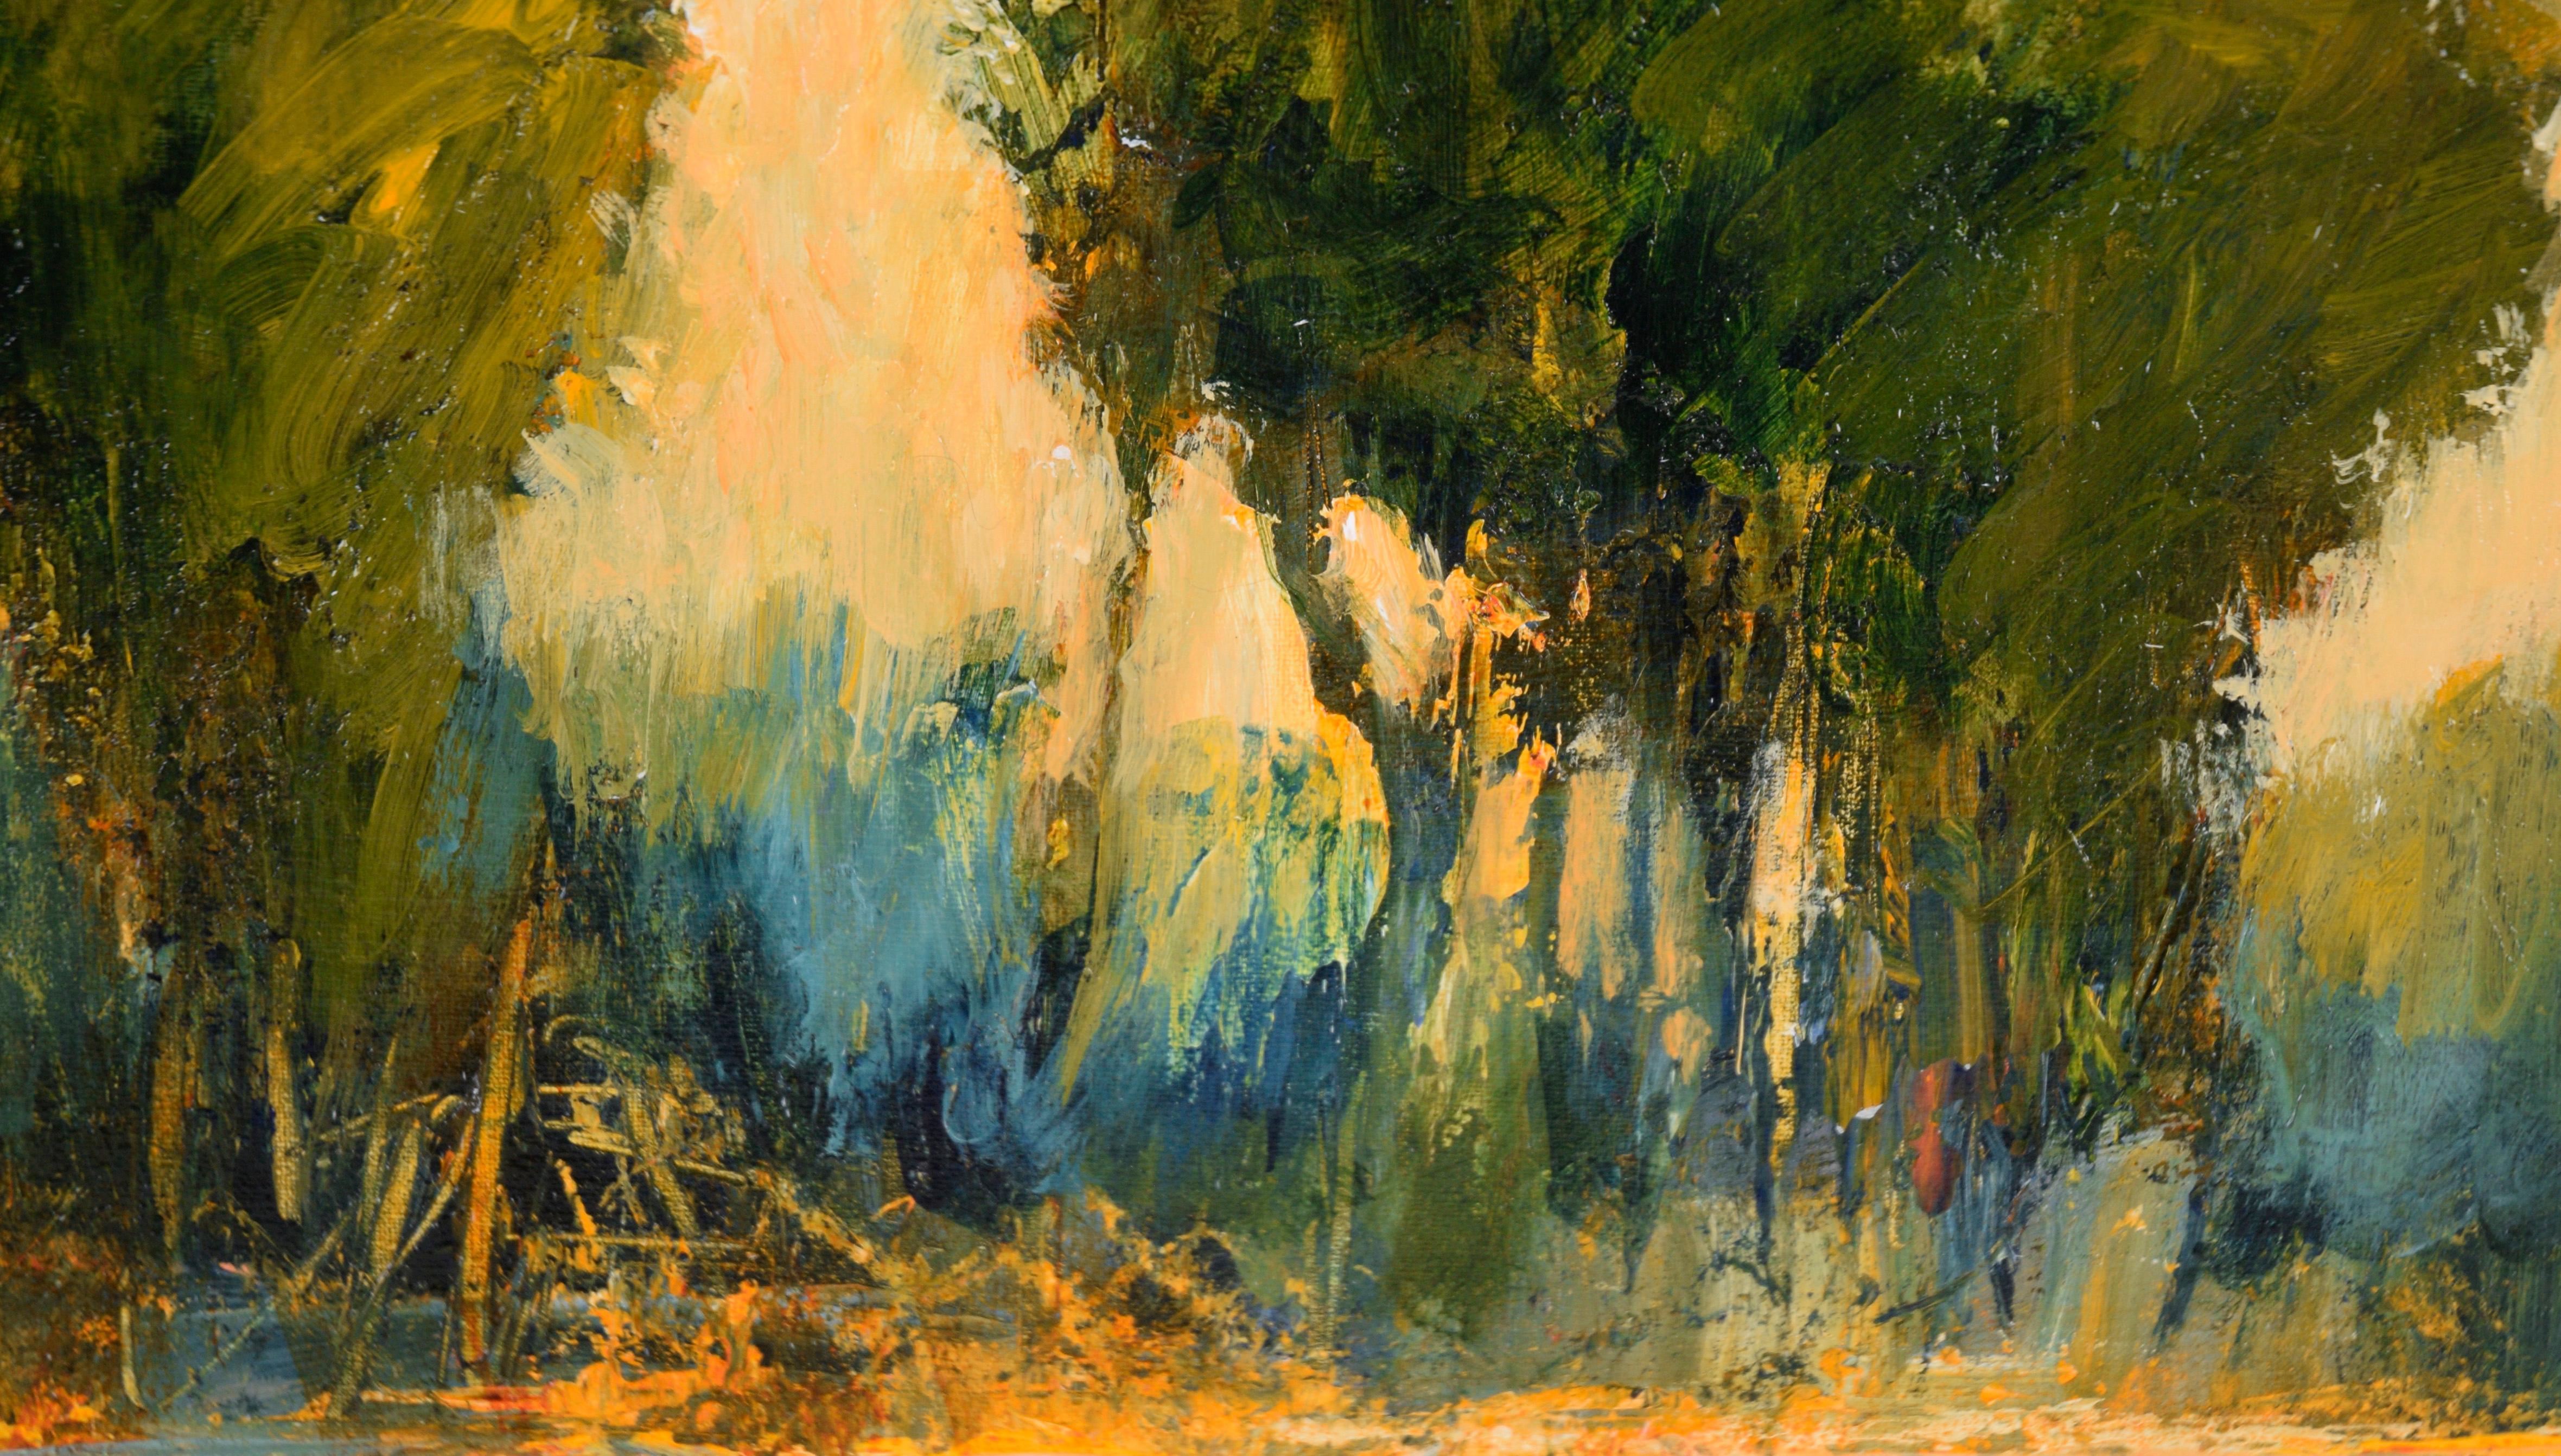 Trees by the Pond at Sunset - Landscape in Acrylic on Artist's Board



Signed 